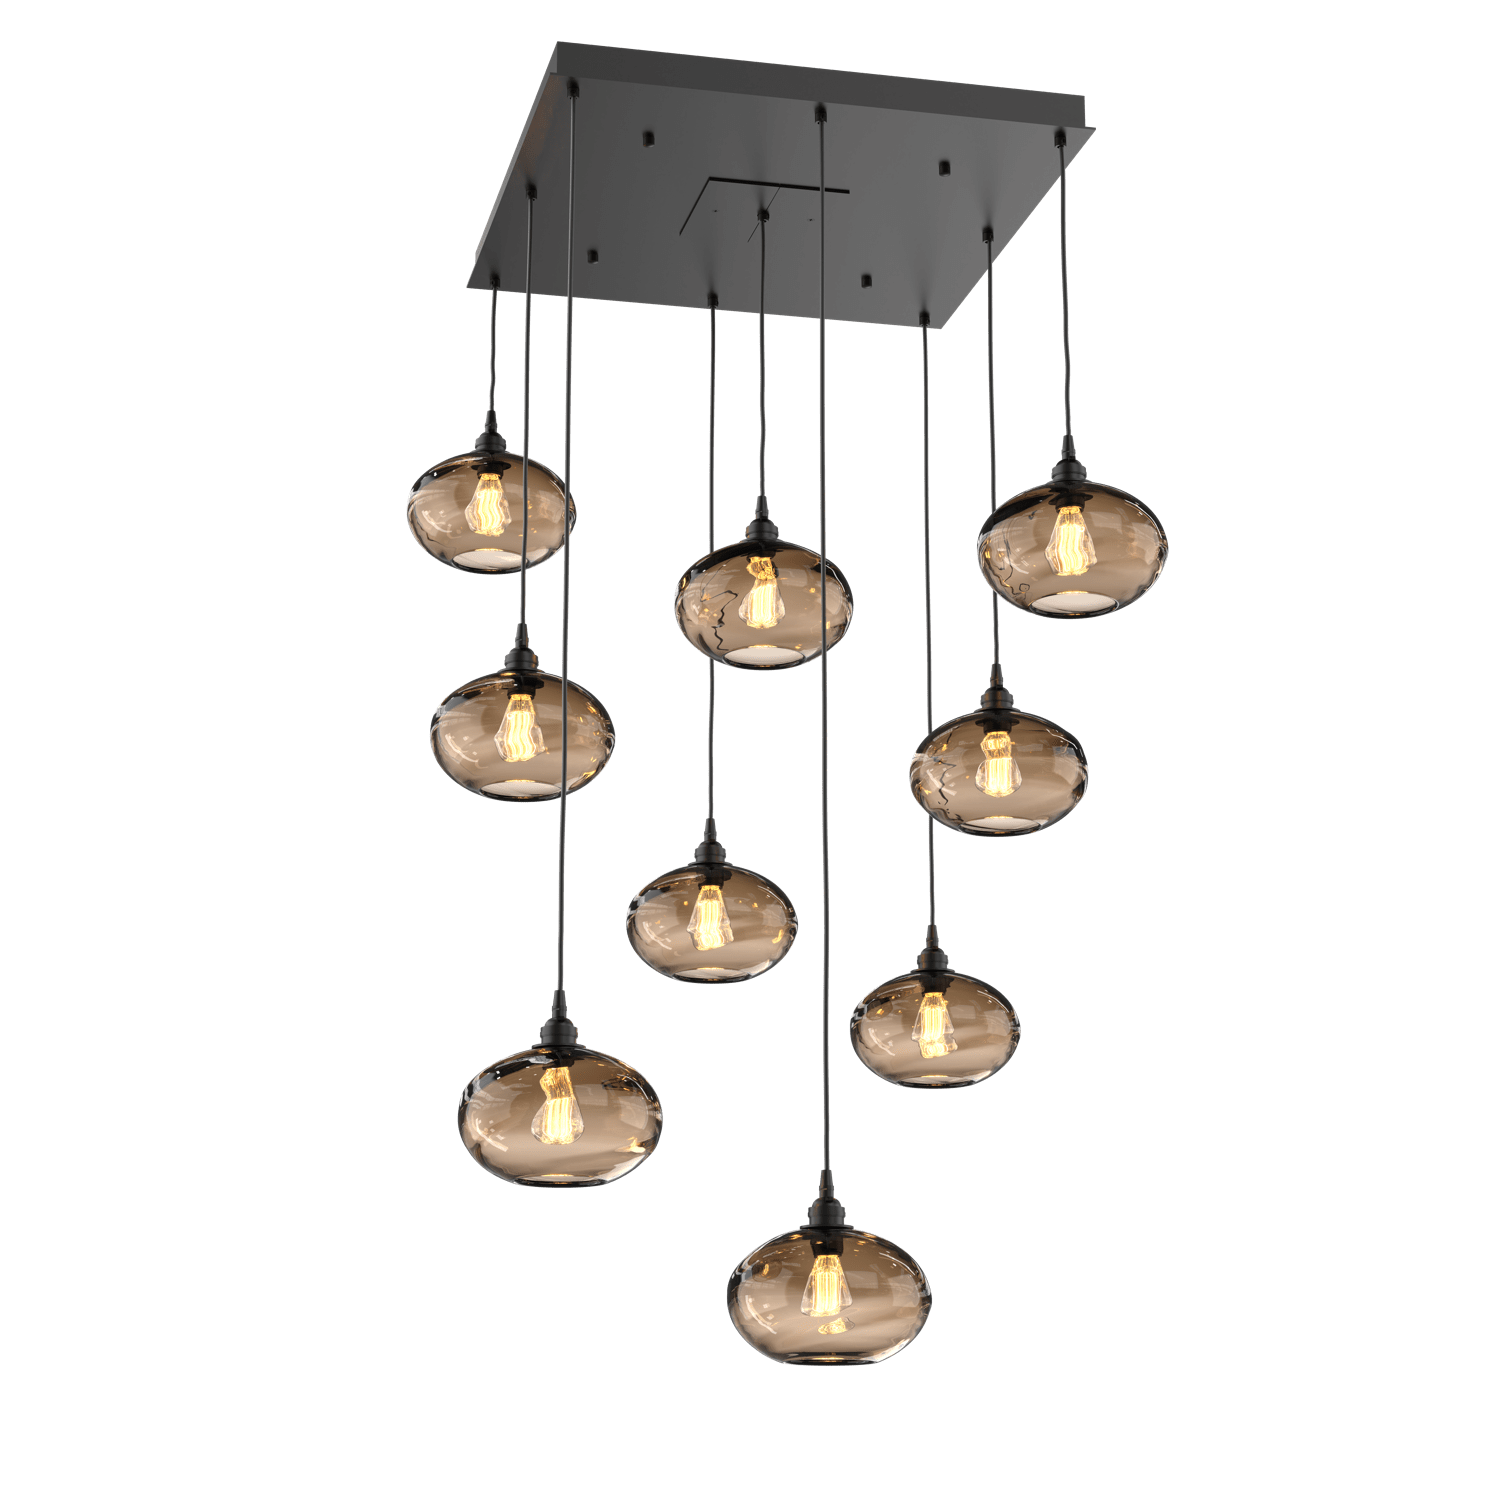 CHB0036-09-MB-OB-Hammerton-Studio-Optic-Blown-Glass-Coppa-9-light-square-pendant-chandelier-with-matte-black-finish-and-optic-bronze-blown-glass-shades-and-incandescent-lamping